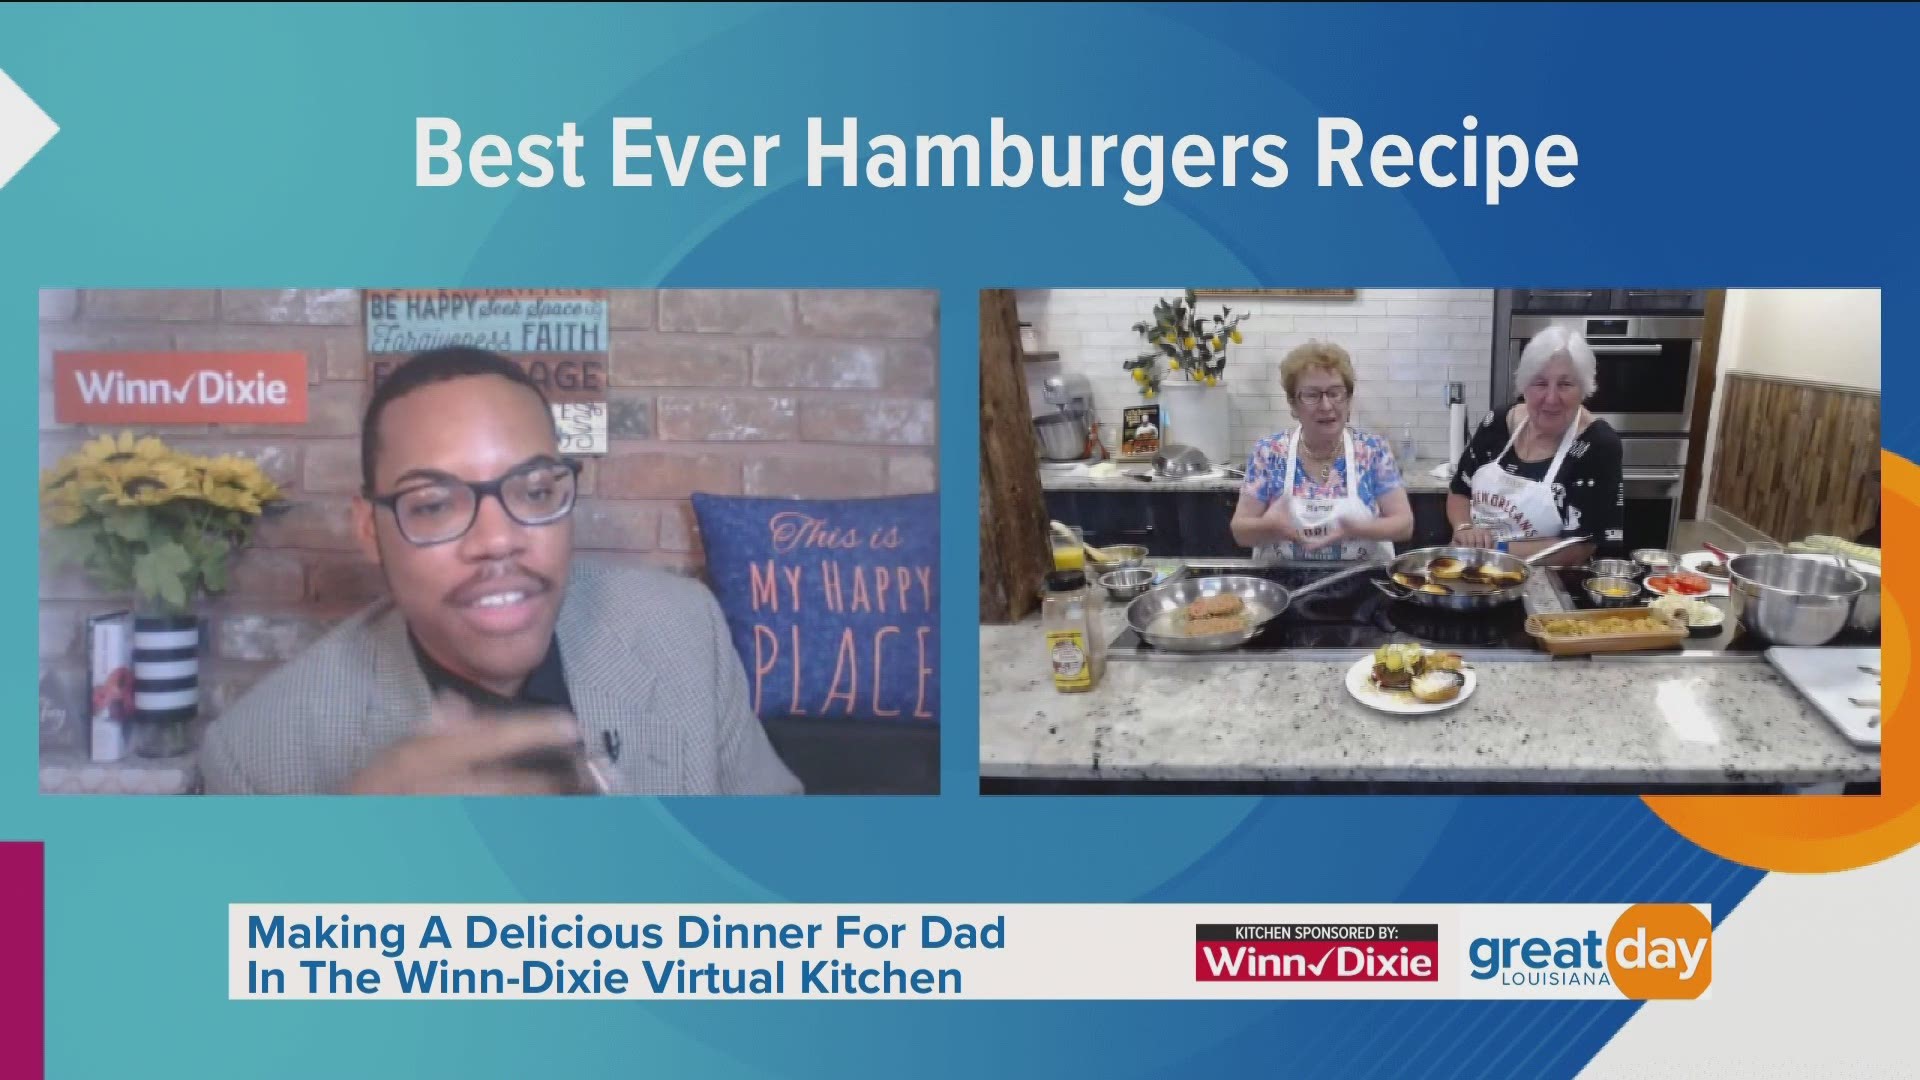 Anne and Harriet from the New Orleans School of Cooking shared a hamburger recipe for Father's Day.